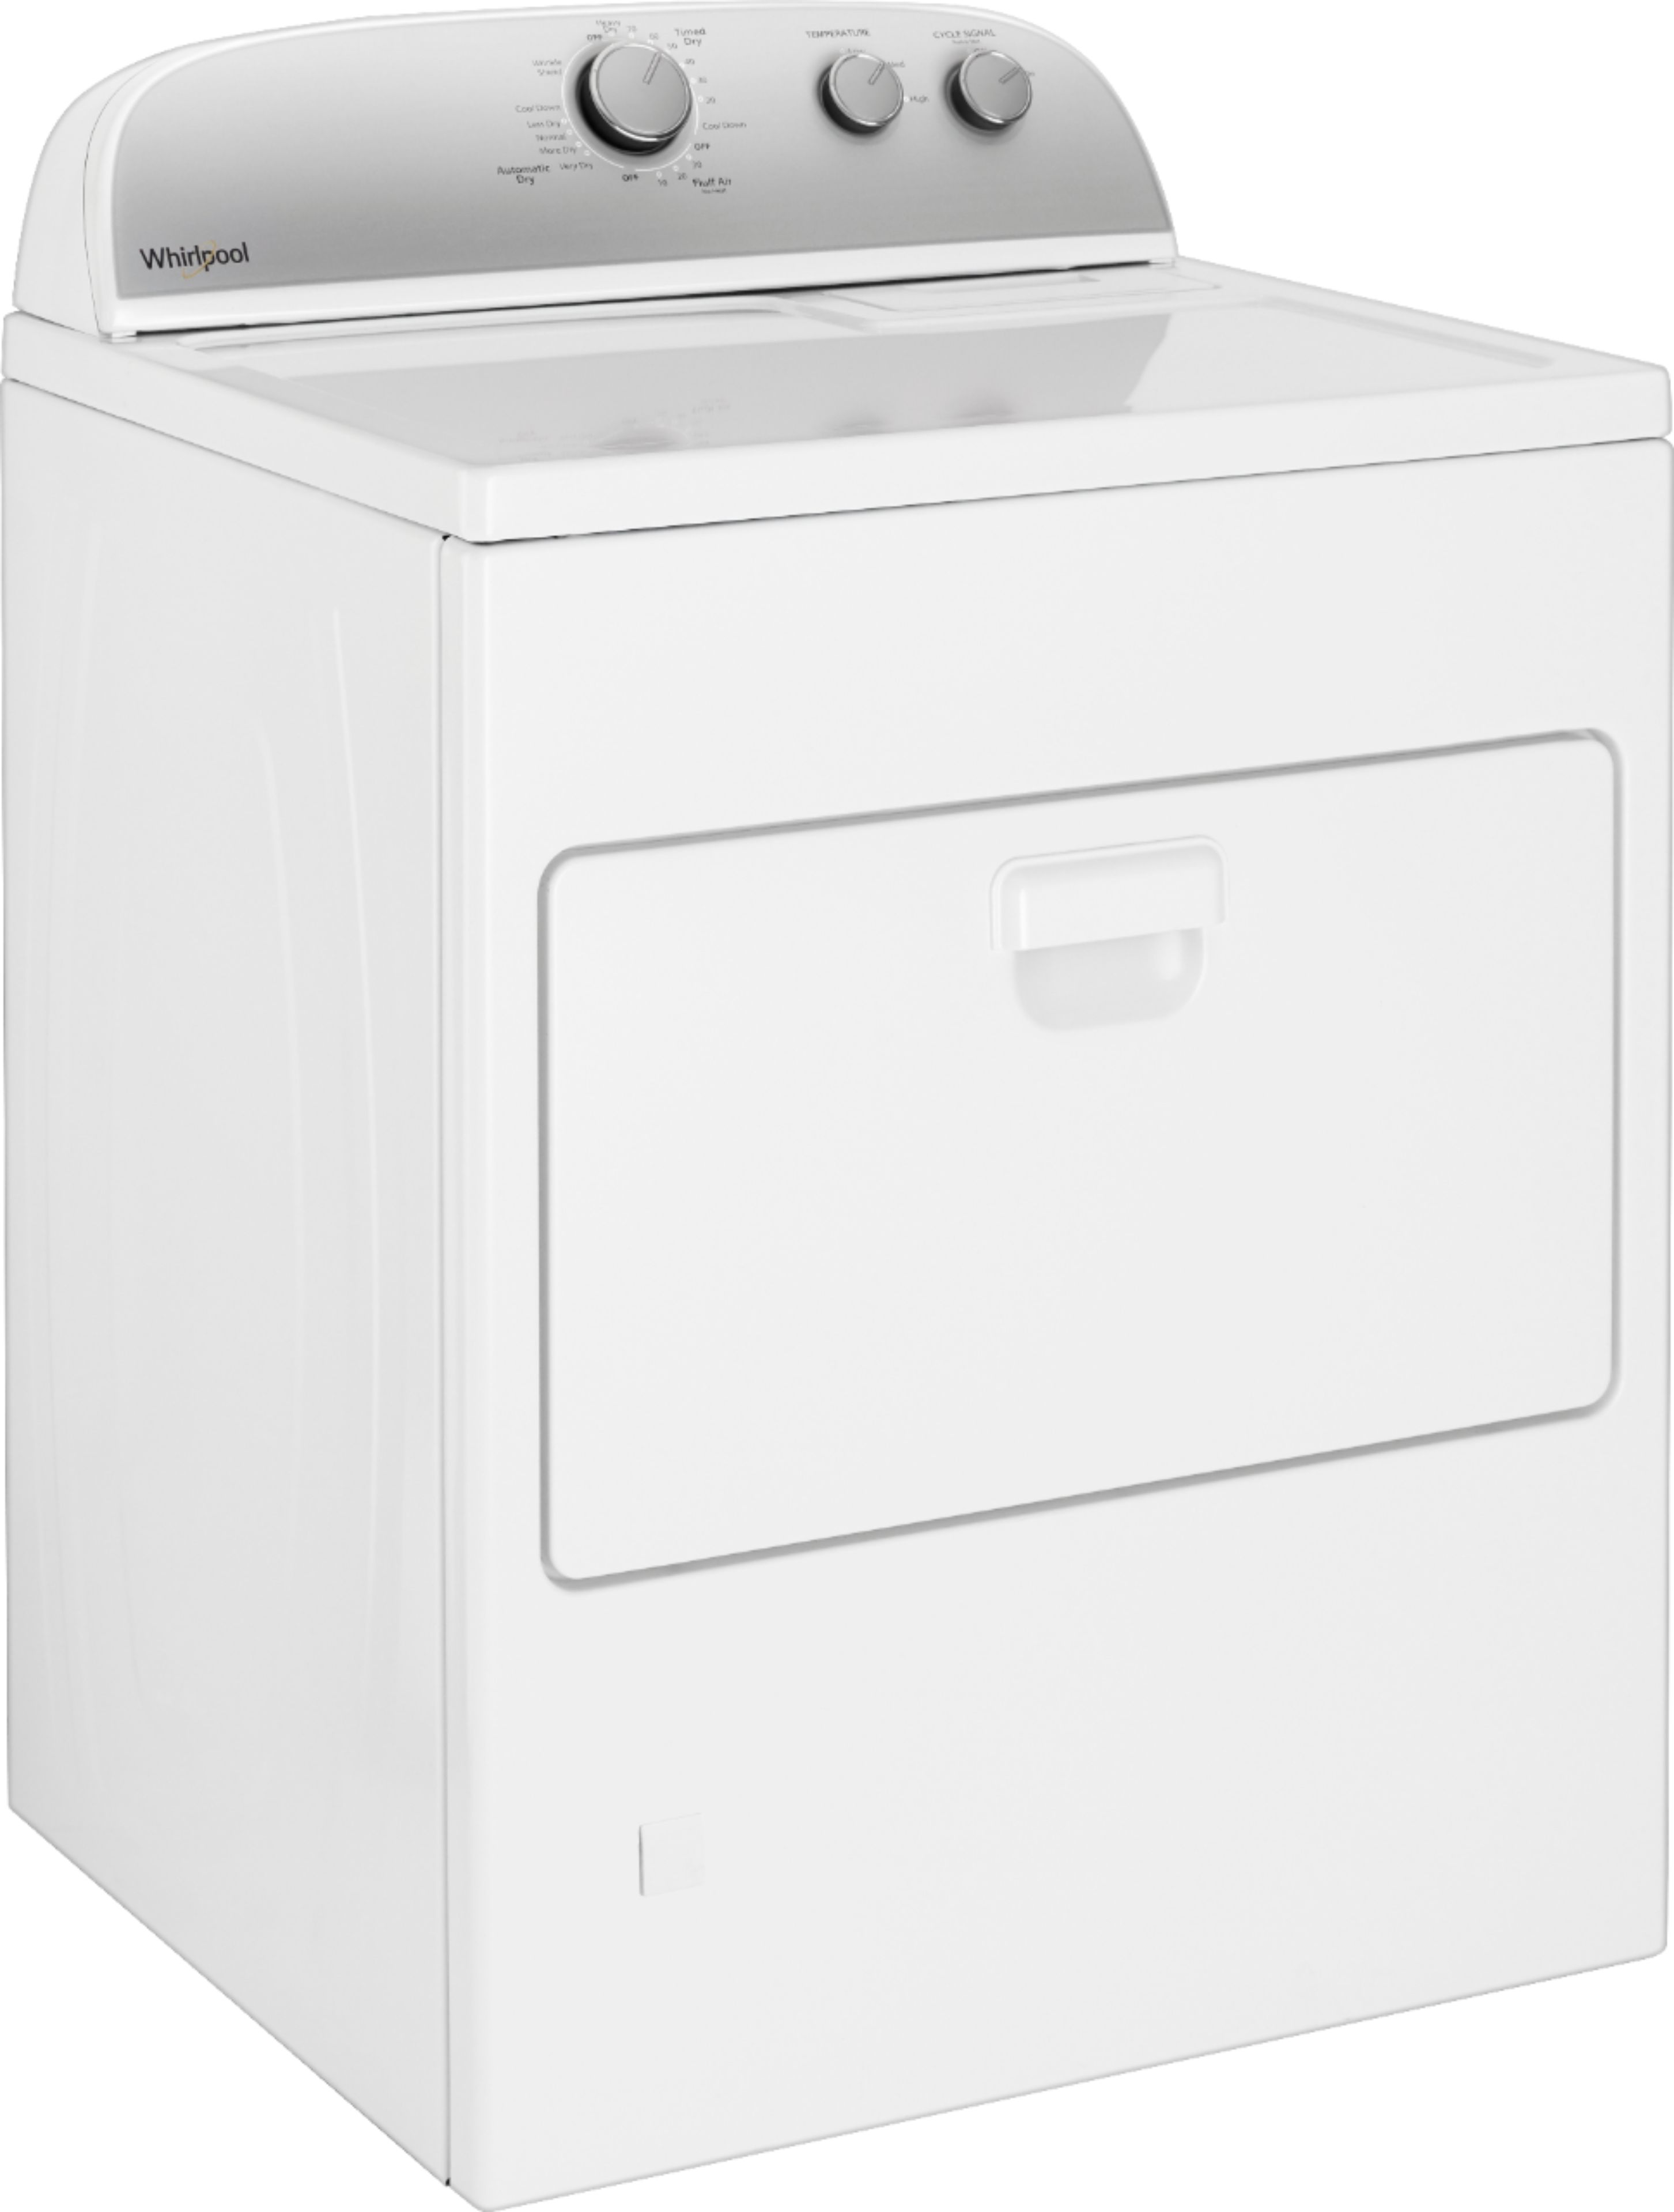 Angle View: Whirlpool - 7.4 Cu. Ft. Electric Dryer with Space Saving Design - White